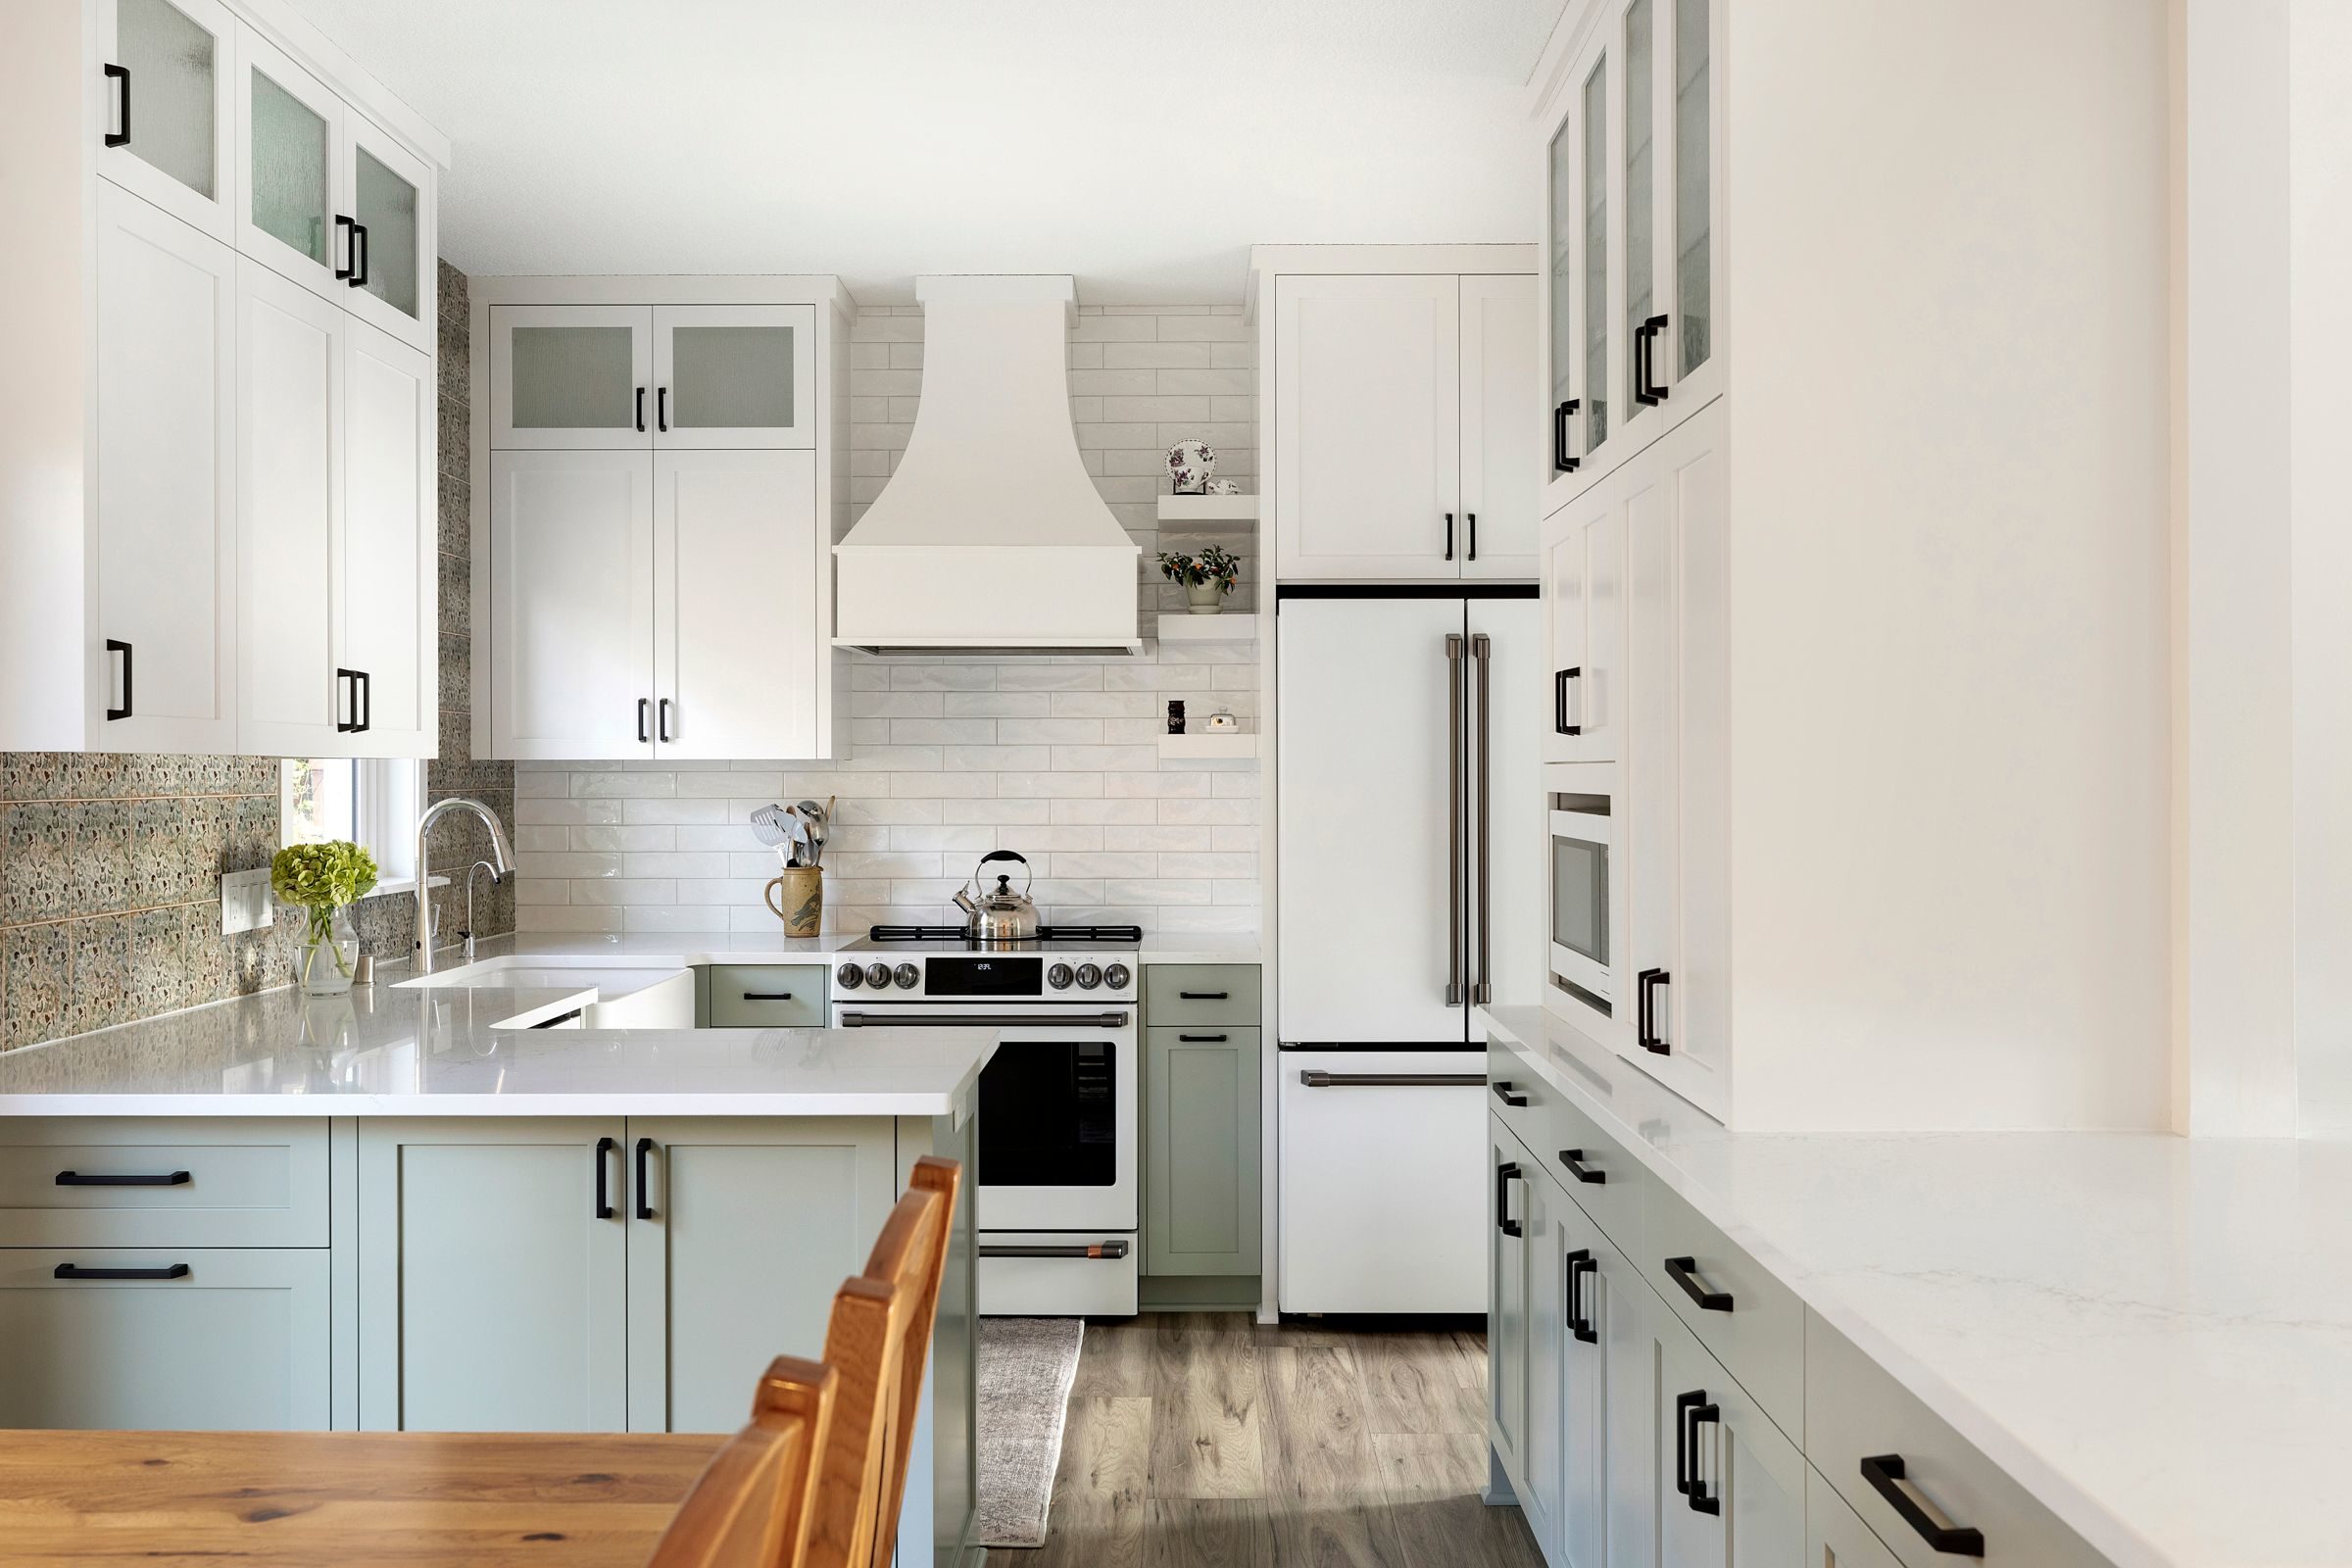 Kitchen Remodeling In The Twin Cities | JBDB